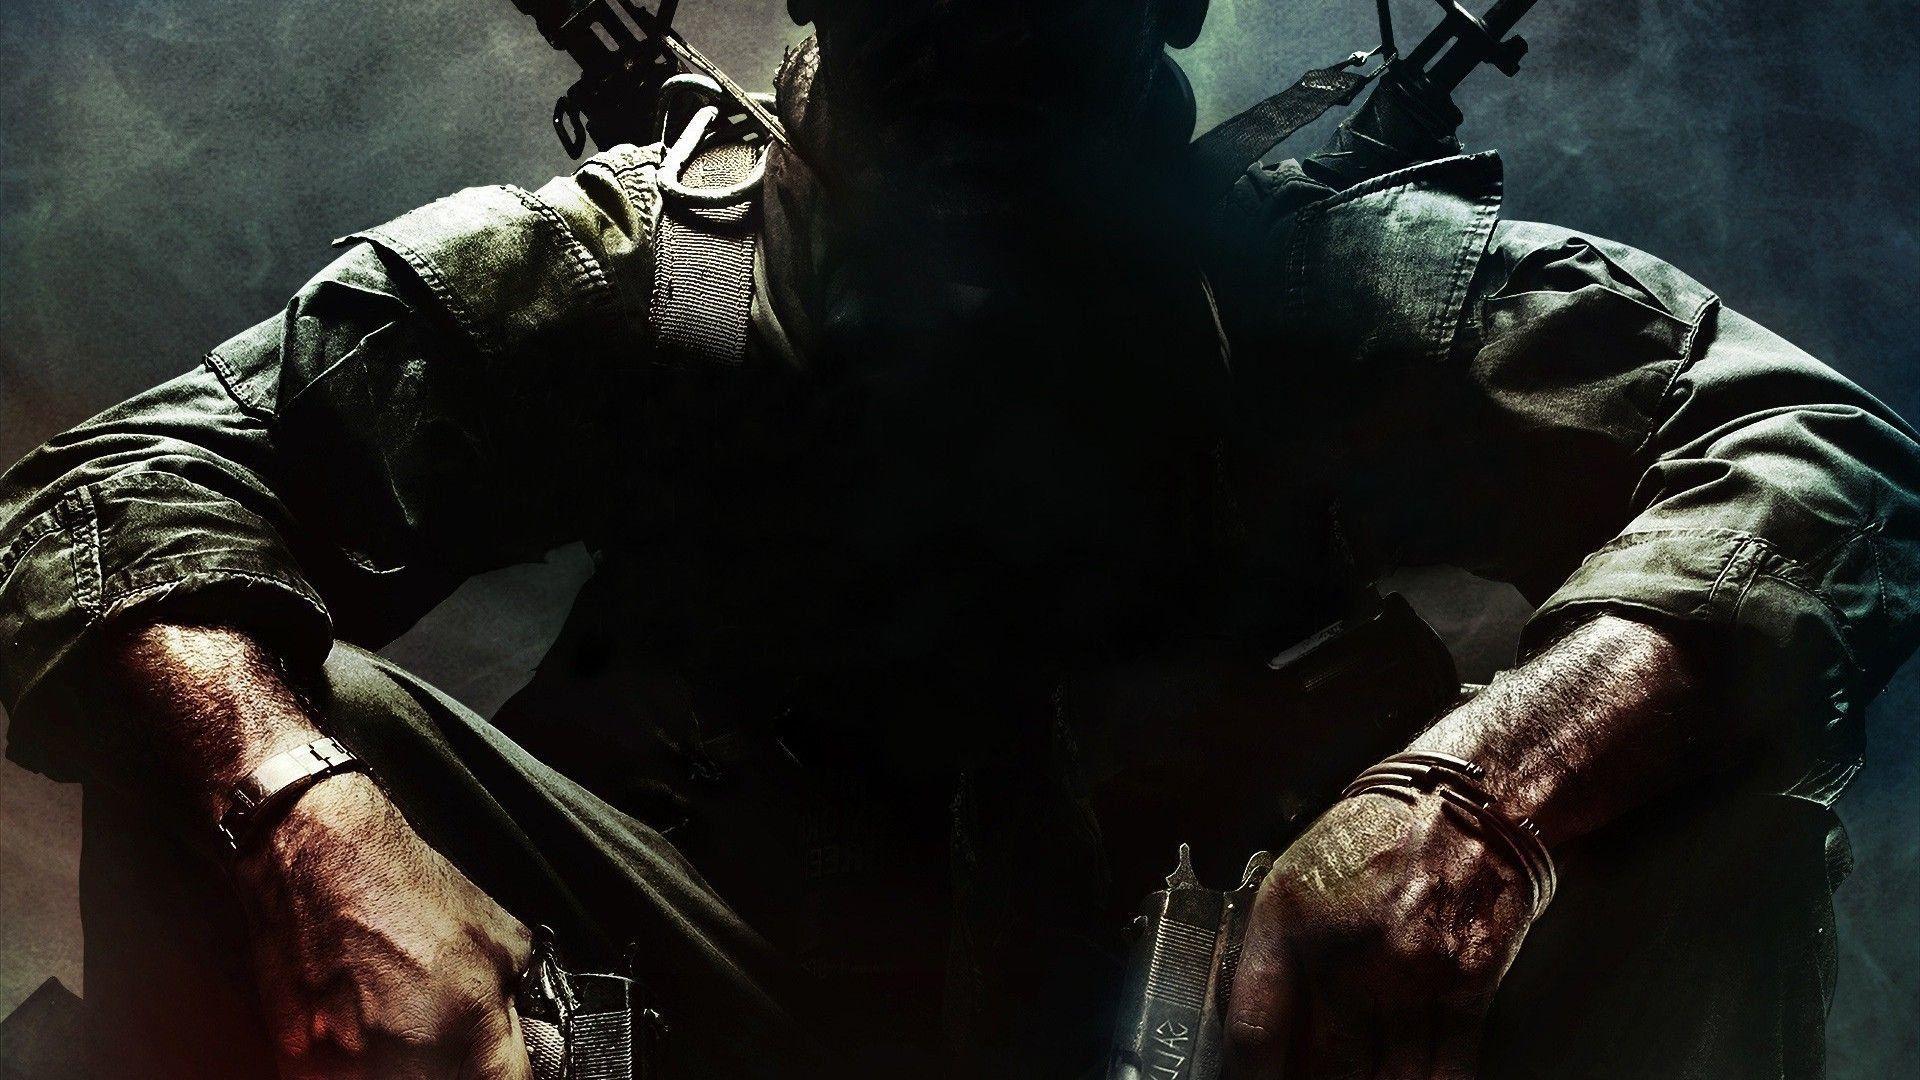 Wallpaper ID 422505  Video Game Call of Duty Black Ops Cold War Phone  Wallpaper  828x1792 free download